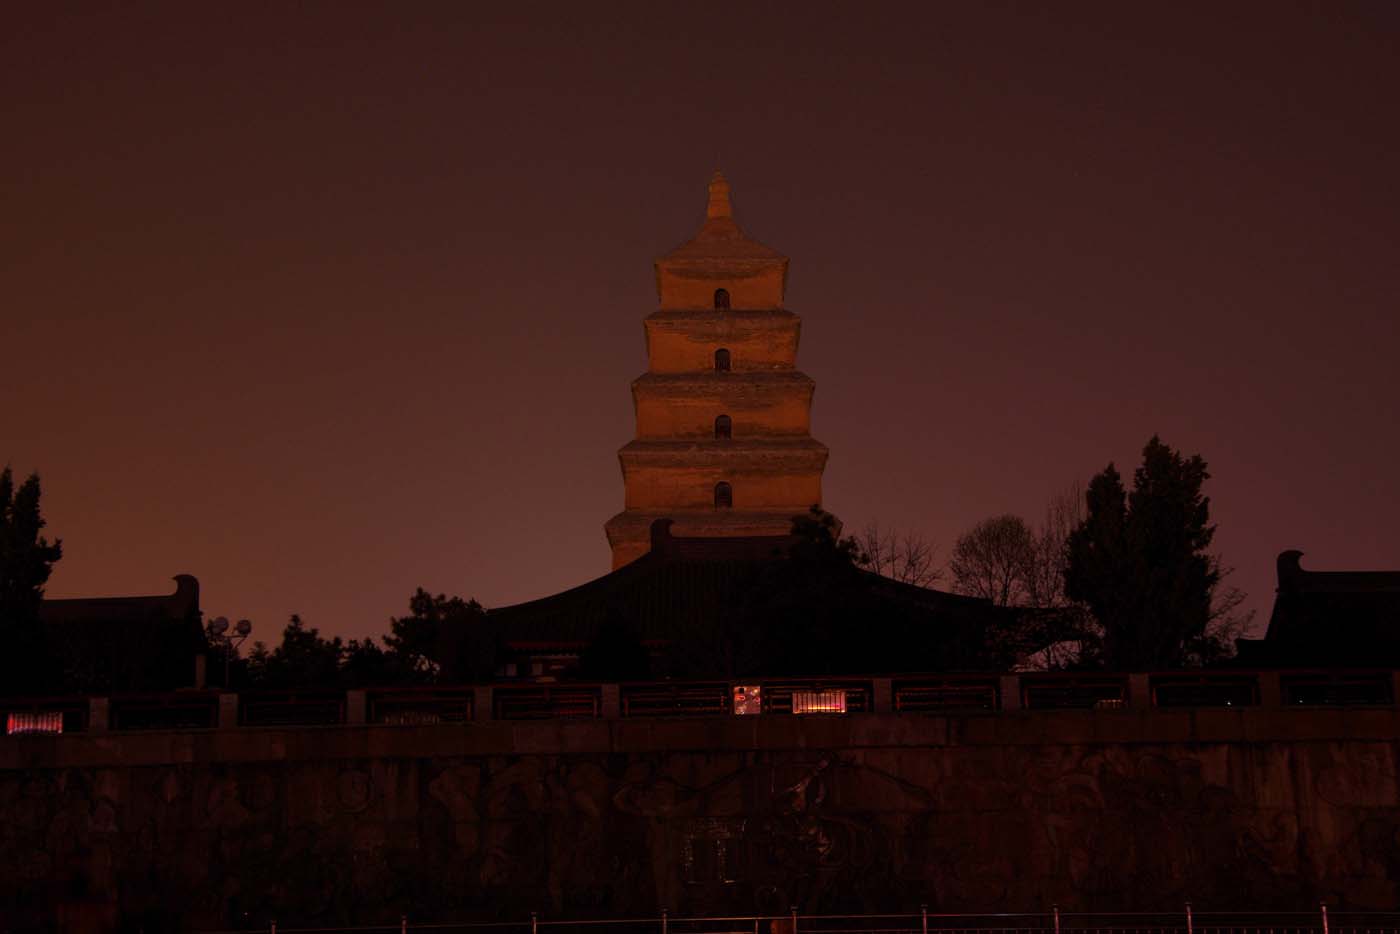 Dayan Pagoda is seen during Earth Hour in Xi'an, Shaanxi province, China, March 25, 2017. Picture taken March 25, 2017. REUTERS/Stringer ATTENTION EDITORS - THIS IMAGE WAS PROVIDED BY A THIRD PARTY. EDITORIAL USE ONLY. CHINA OUT. NO COMMERCIAL OR EDITORIAL SALES IN CHINA.